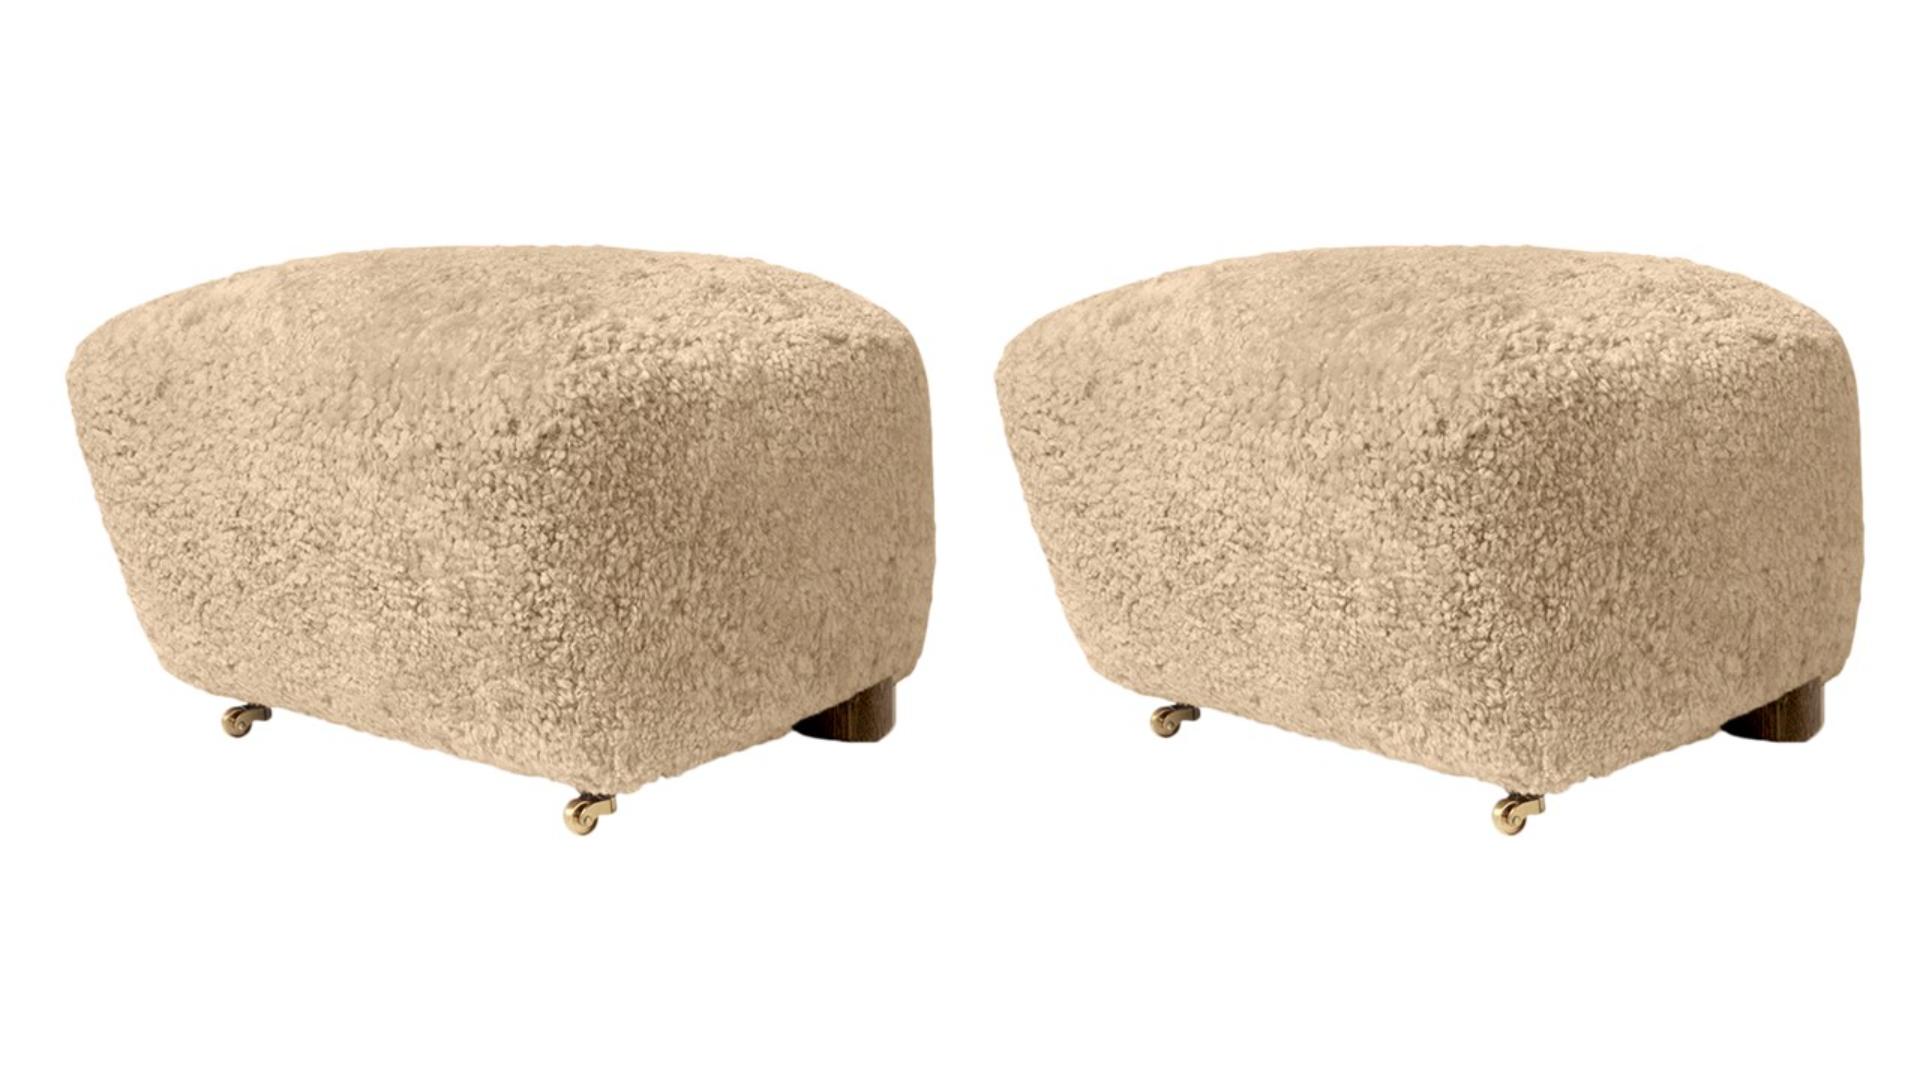 Set of 2 honey smoked Oak Sheepskin the Tired Man footstools by Lassen
Dimensions: W 55 x D 53 x H 36 cm 
Materials: Sheepskin

Flemming Lassen designed the overstuffed easy chair, The Tired Man, for The Copenhagen Cabinetmakers’ Guild